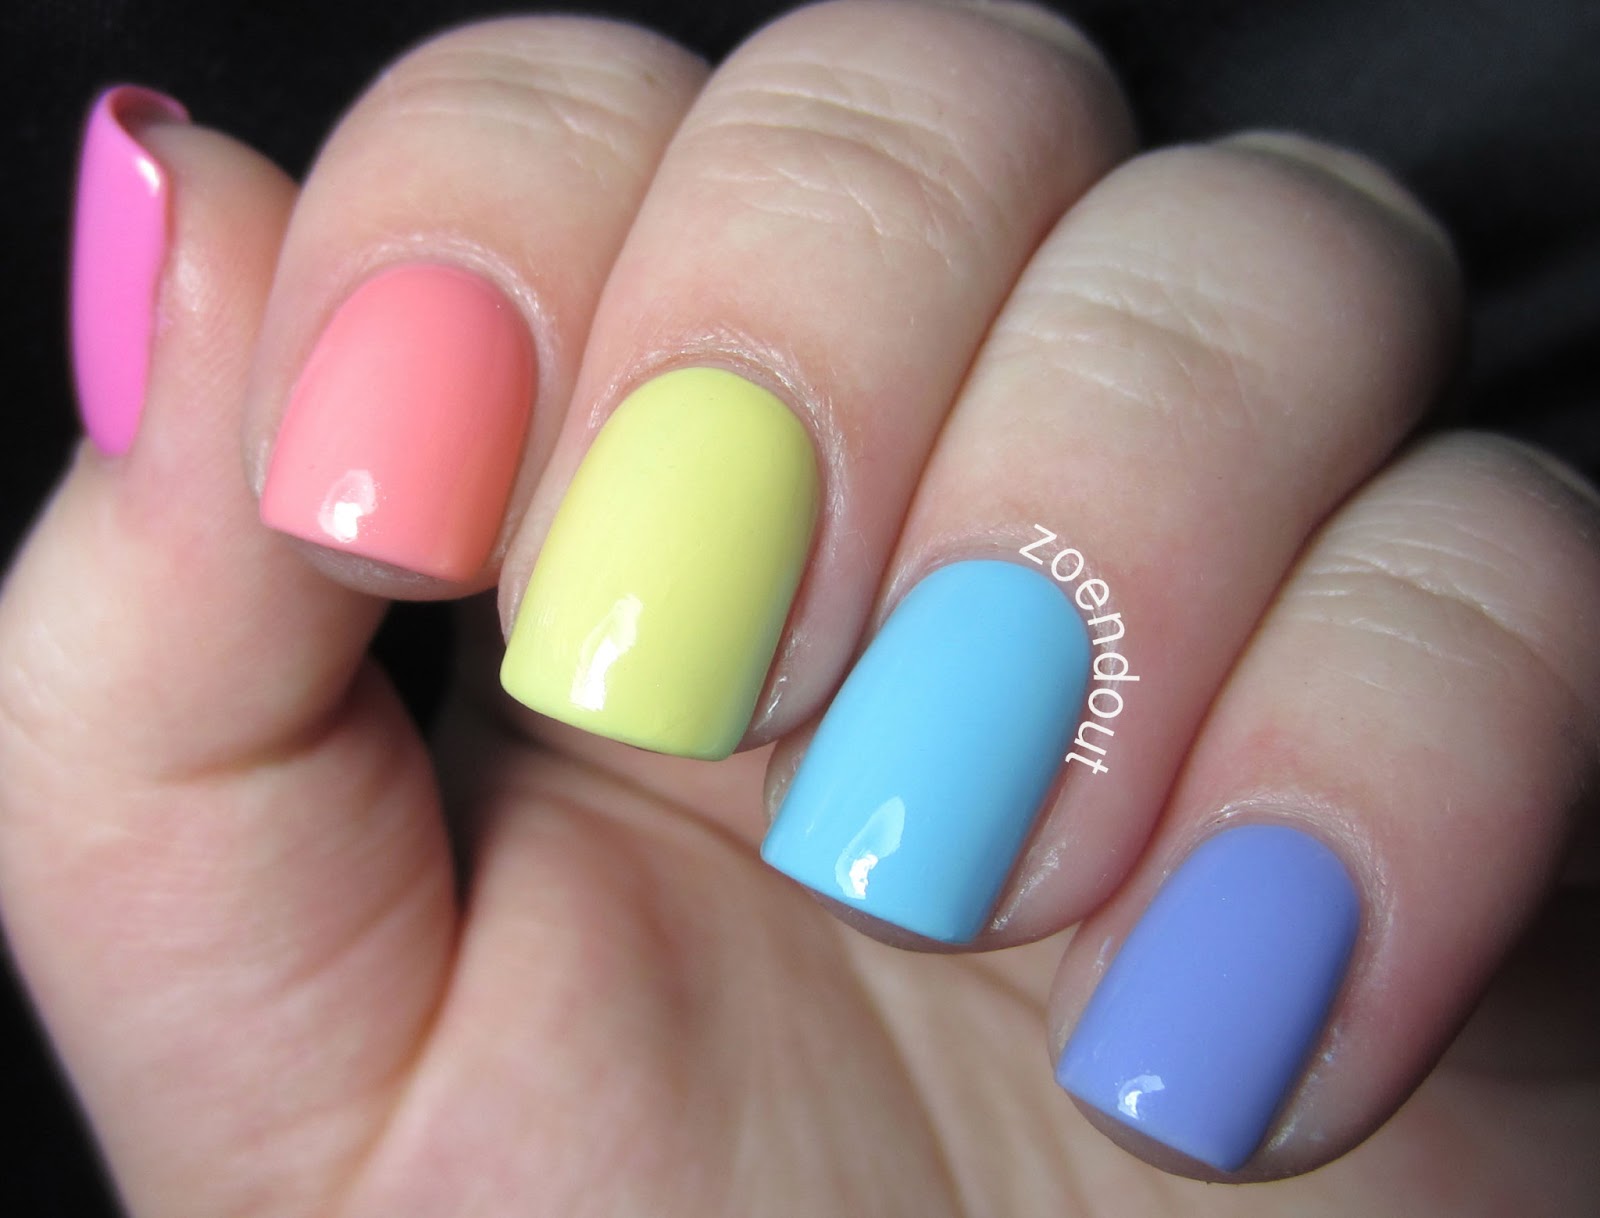 3. "Pastel Nail Colors That Will Make You Swoon" - wide 3